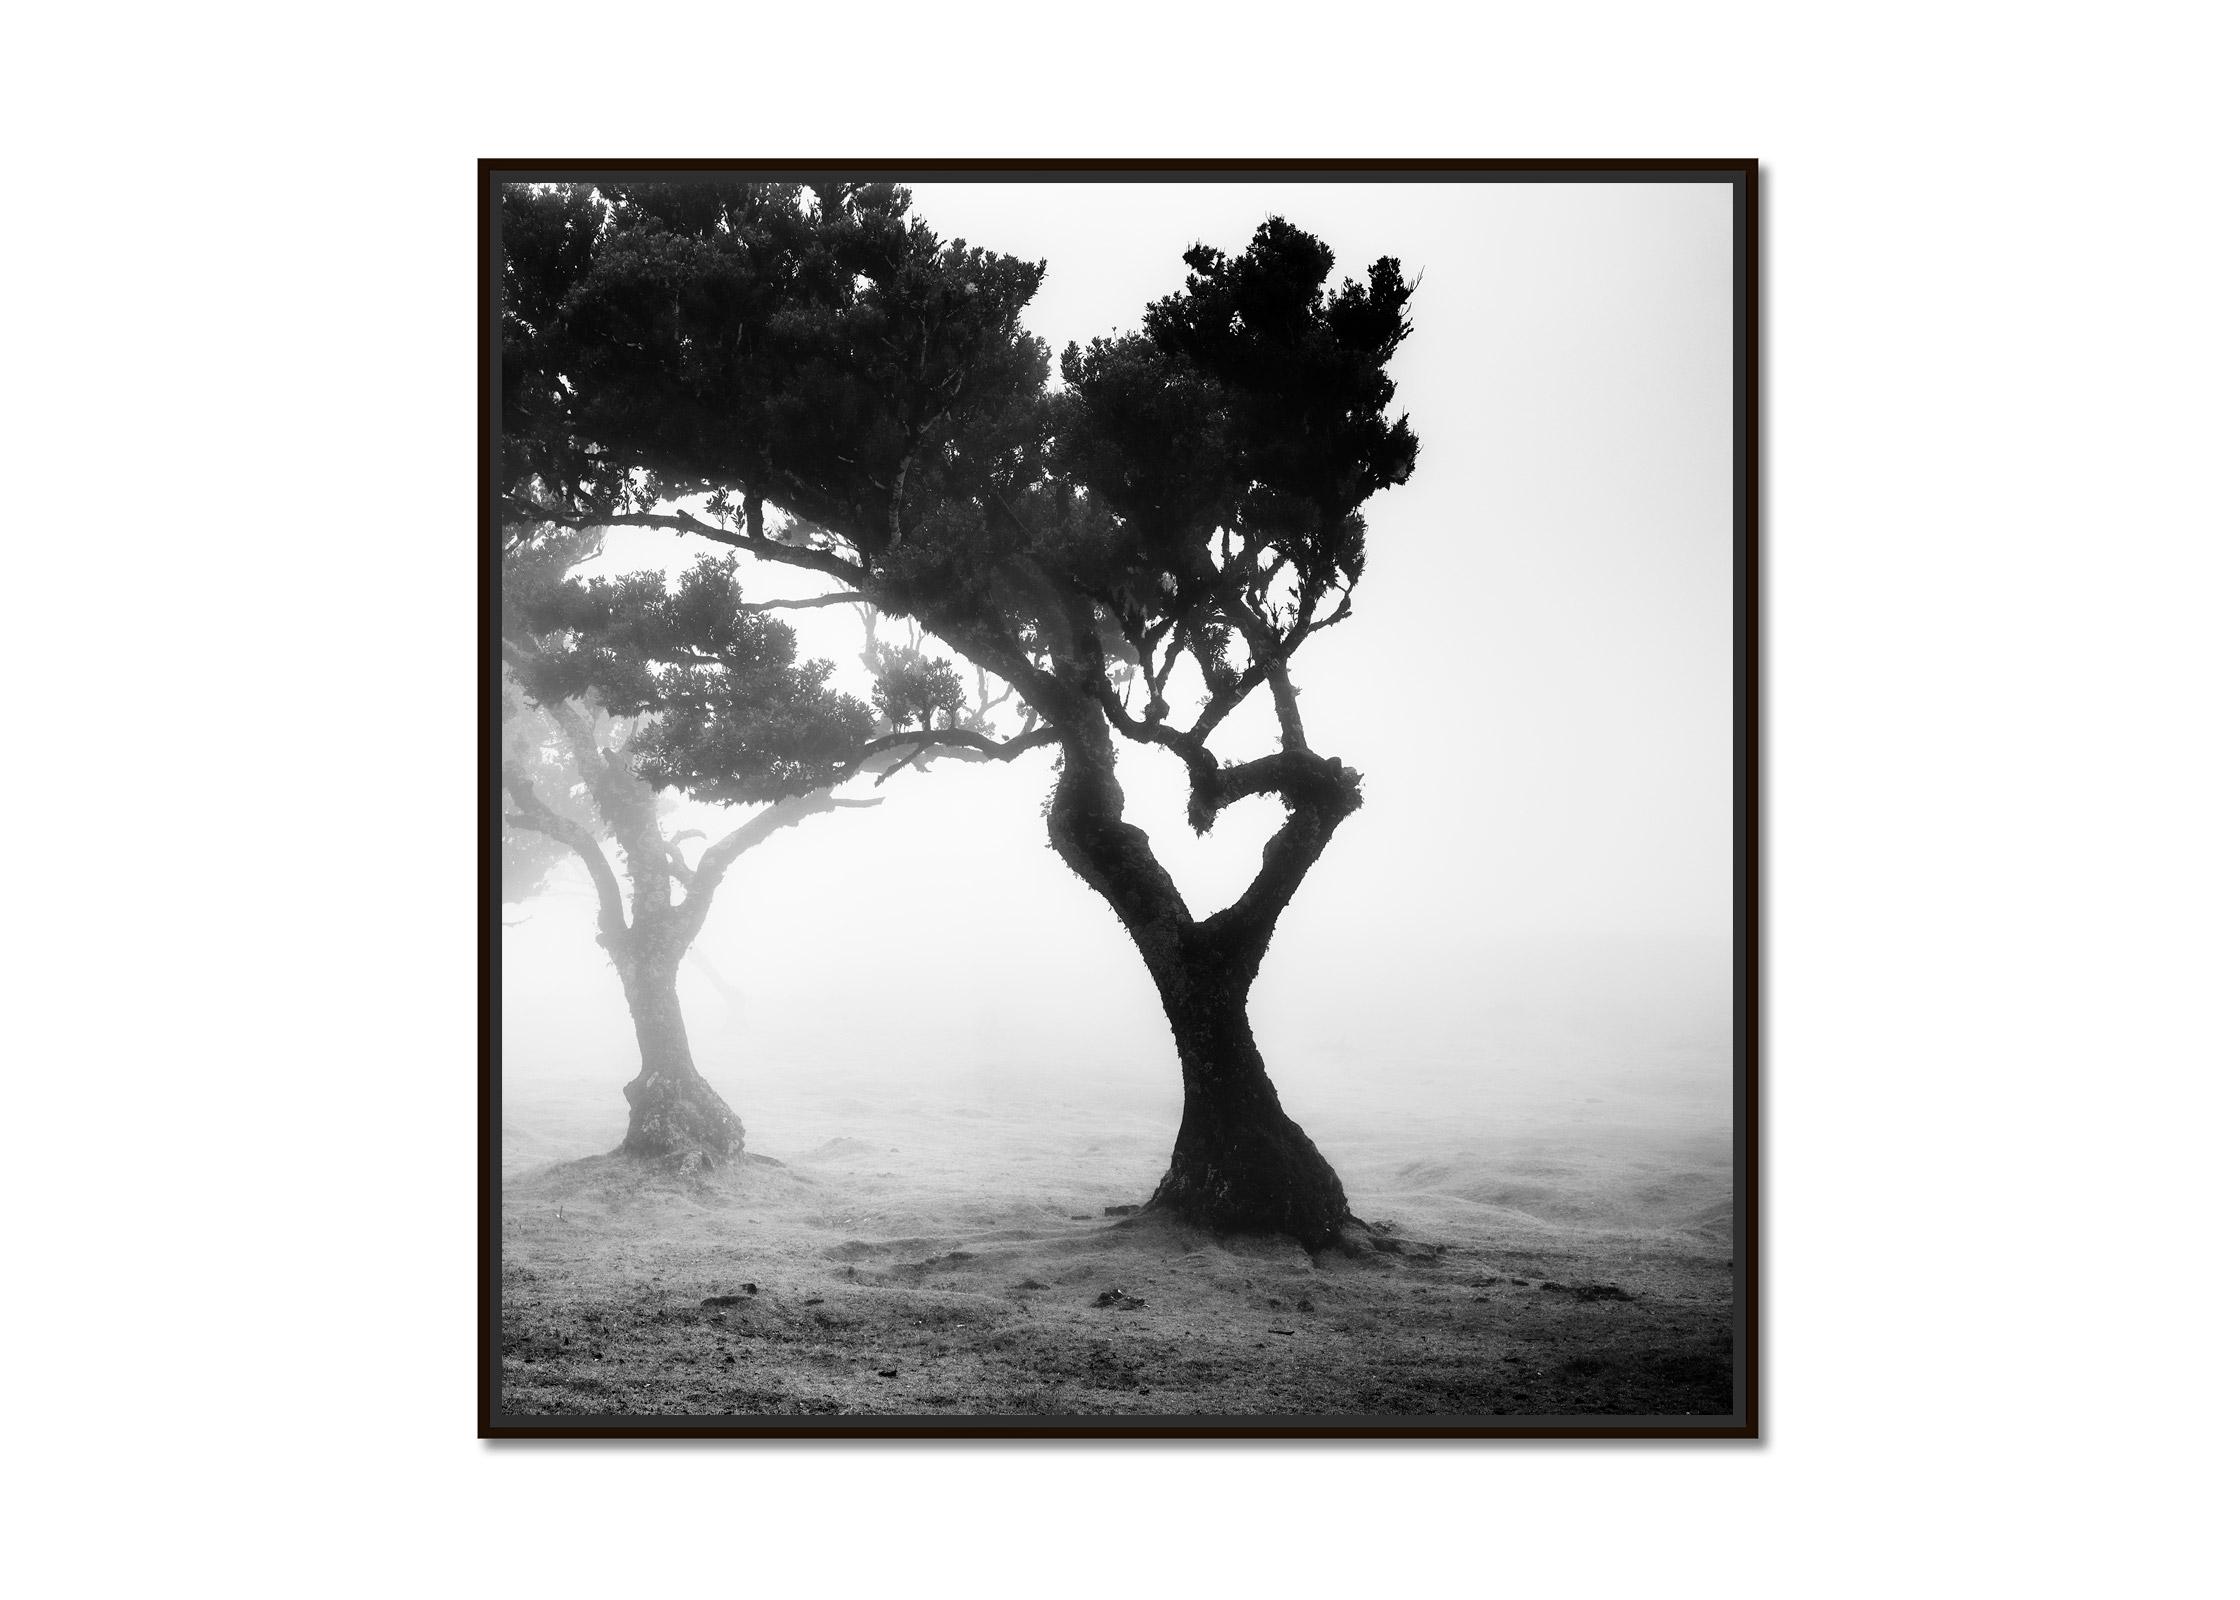 Love in the mist Forest, Portugal, black and white fineart landscape photography - Photograph by Gerald Berghammer